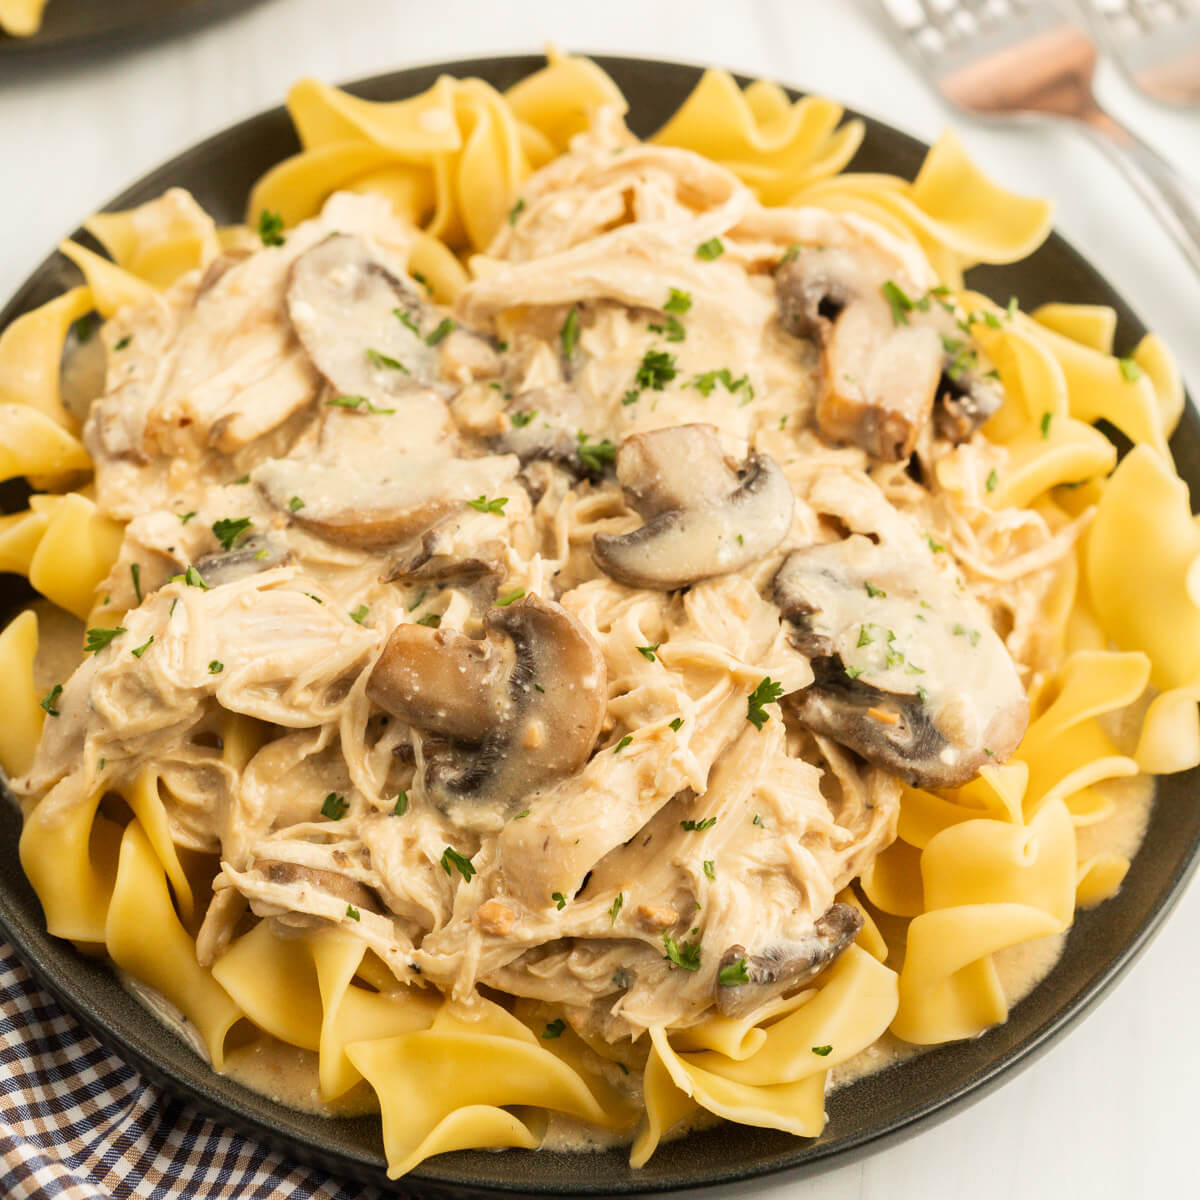 Chicken stroganoff topped on egg noodles on a plate